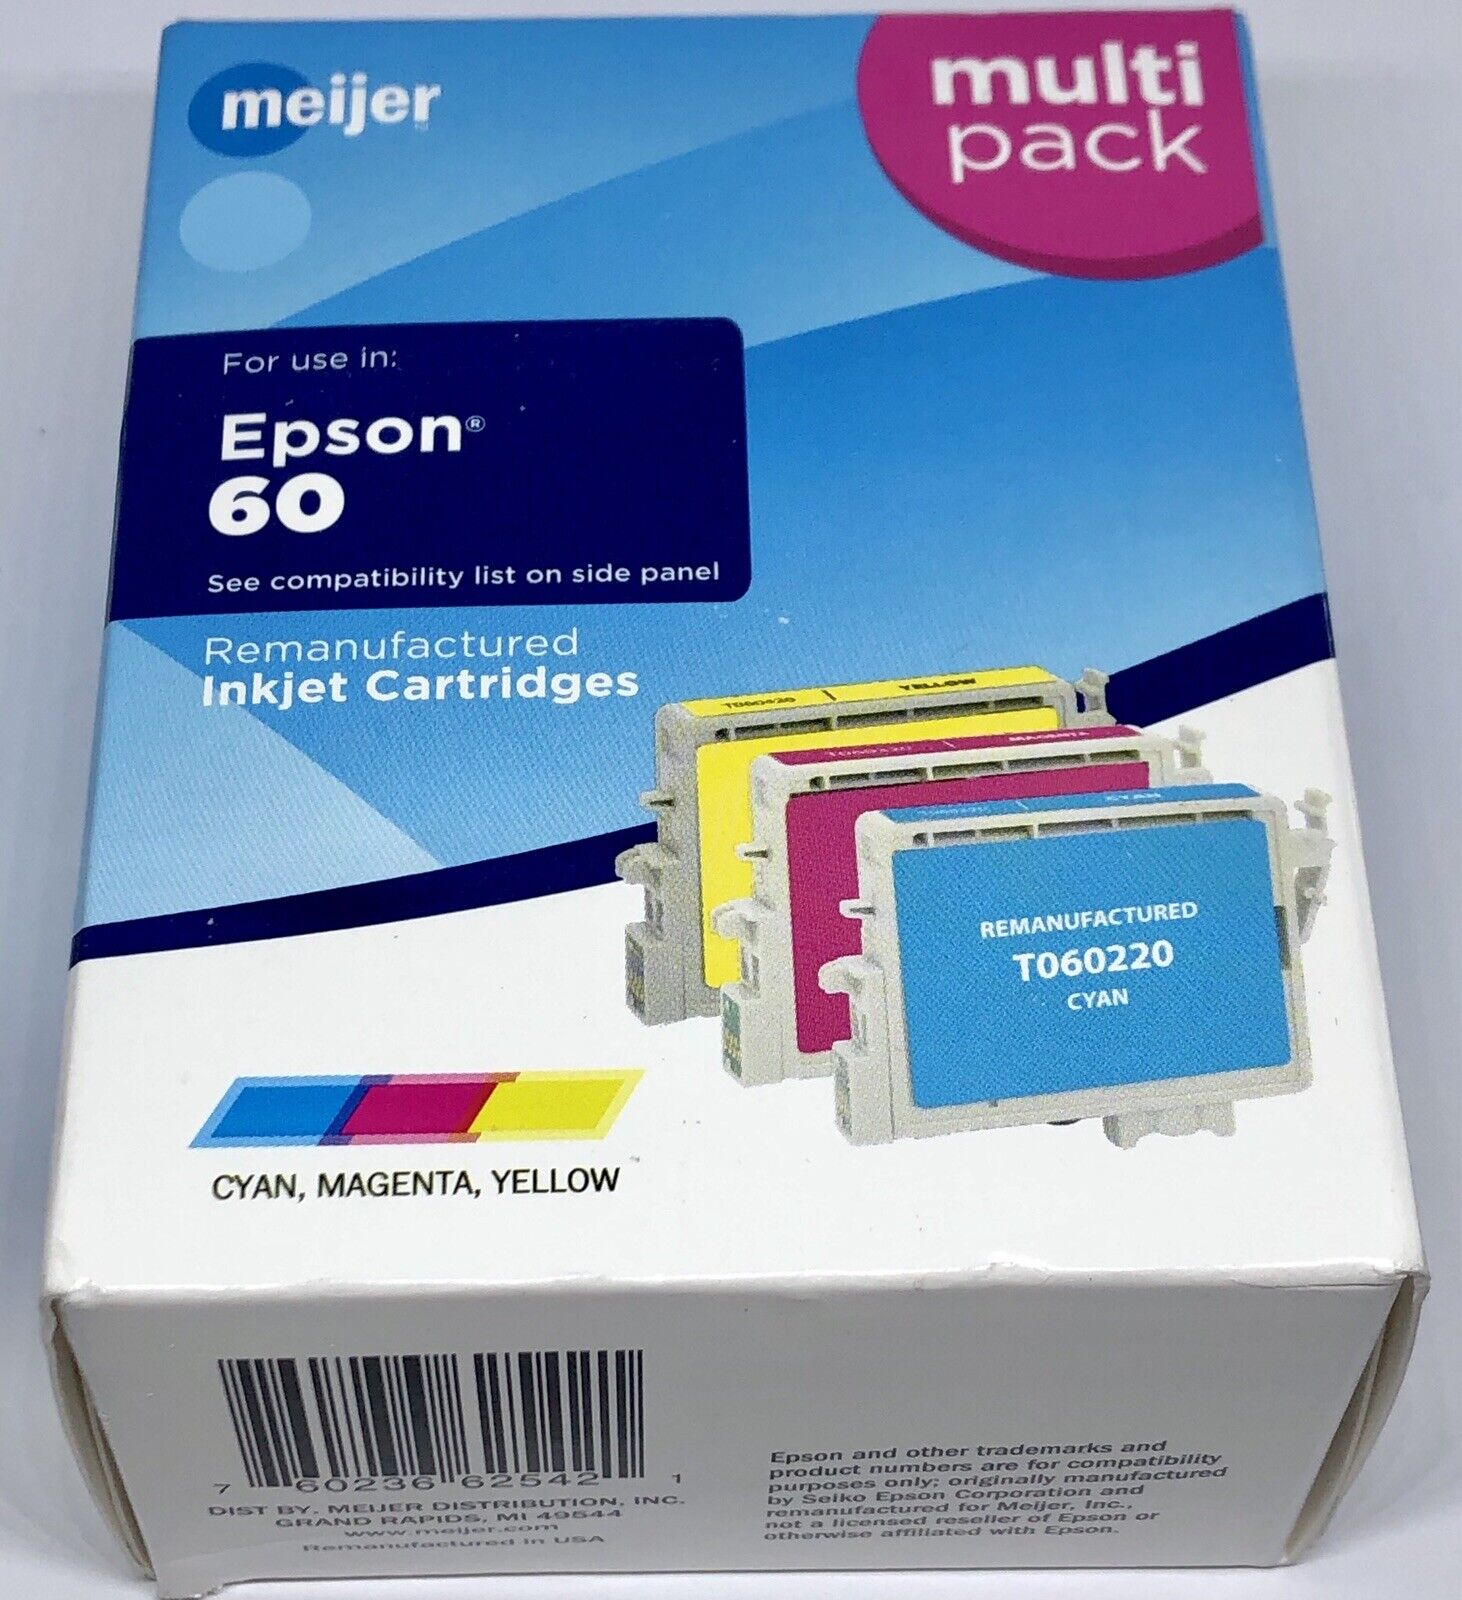 Epson 60 Color Inkjet Cartridges Remanufactured Buy Now